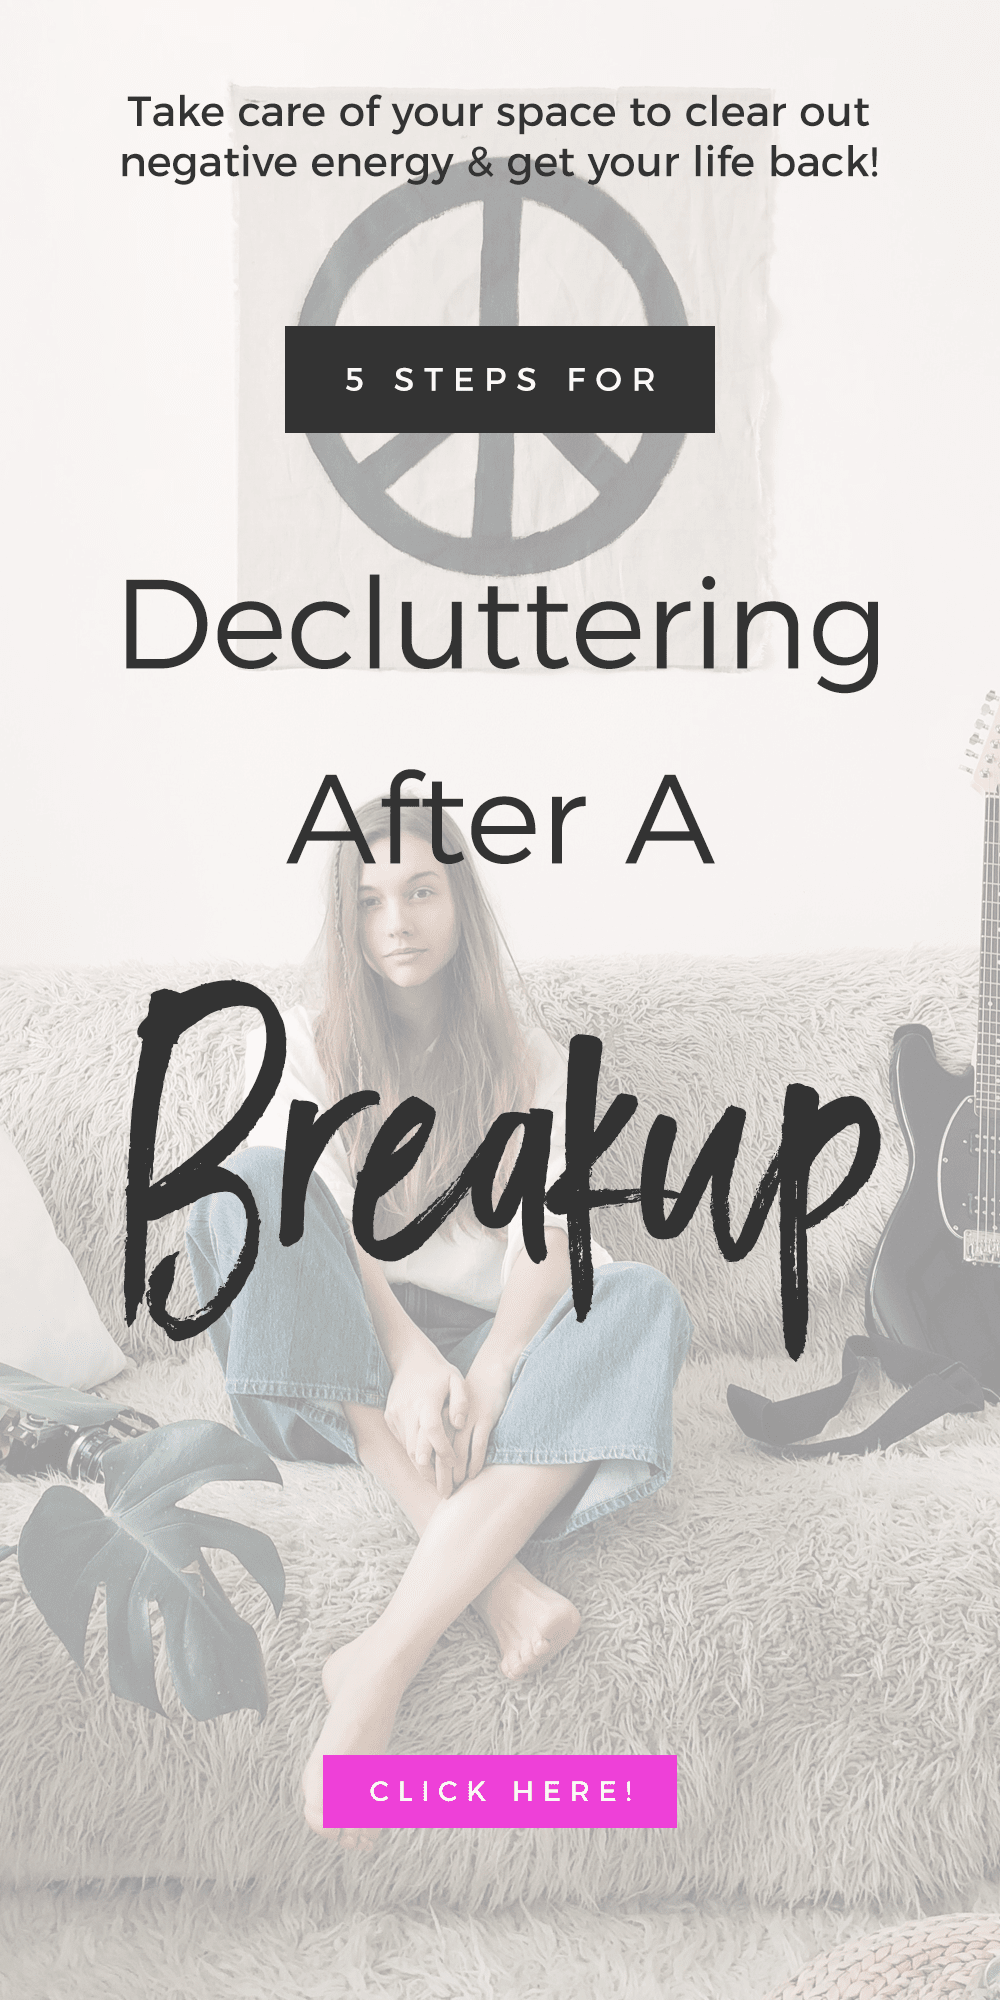 5 Steps For Decluttering After A Breakup